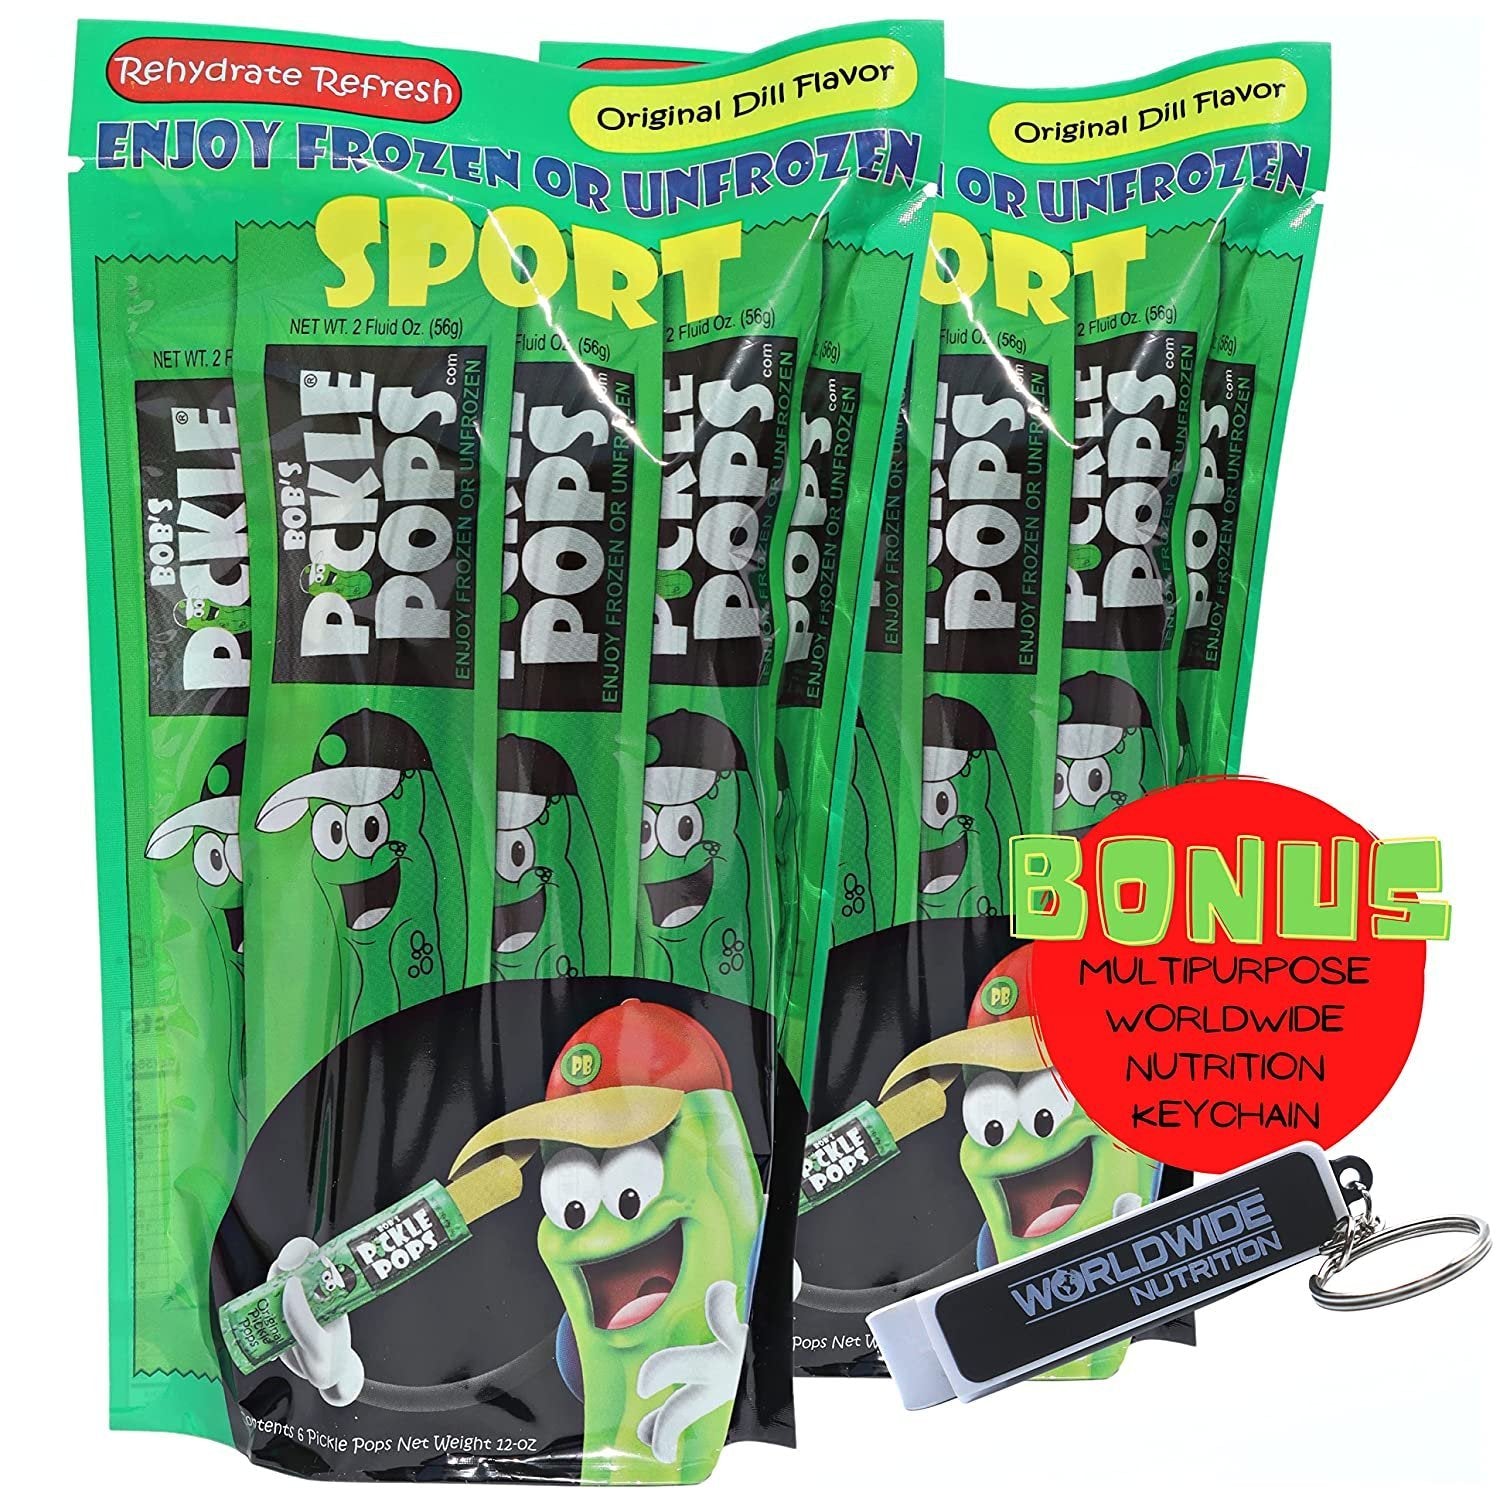 Bobs Pickle Pops Mucho Macho Chamoy - Electrolytes Freezer Pops Pre Workout Hydration - Athlete Recovery Pickle Juice for Leg Cramps - 3 Pk, 18 Ice Pops with Multi Purpose Key Chain